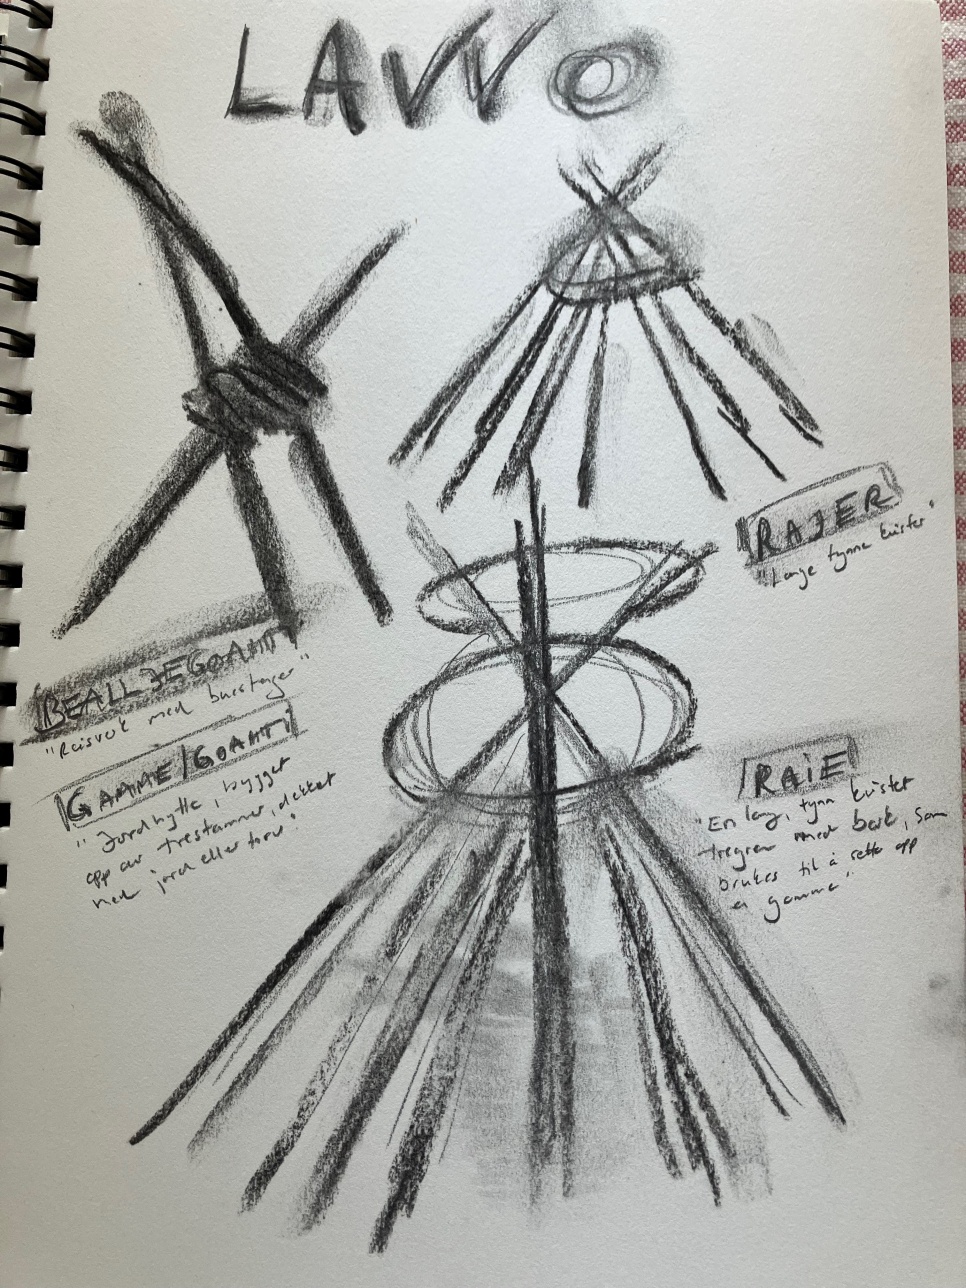 Pencil sketches on paper of tent structures, with notes